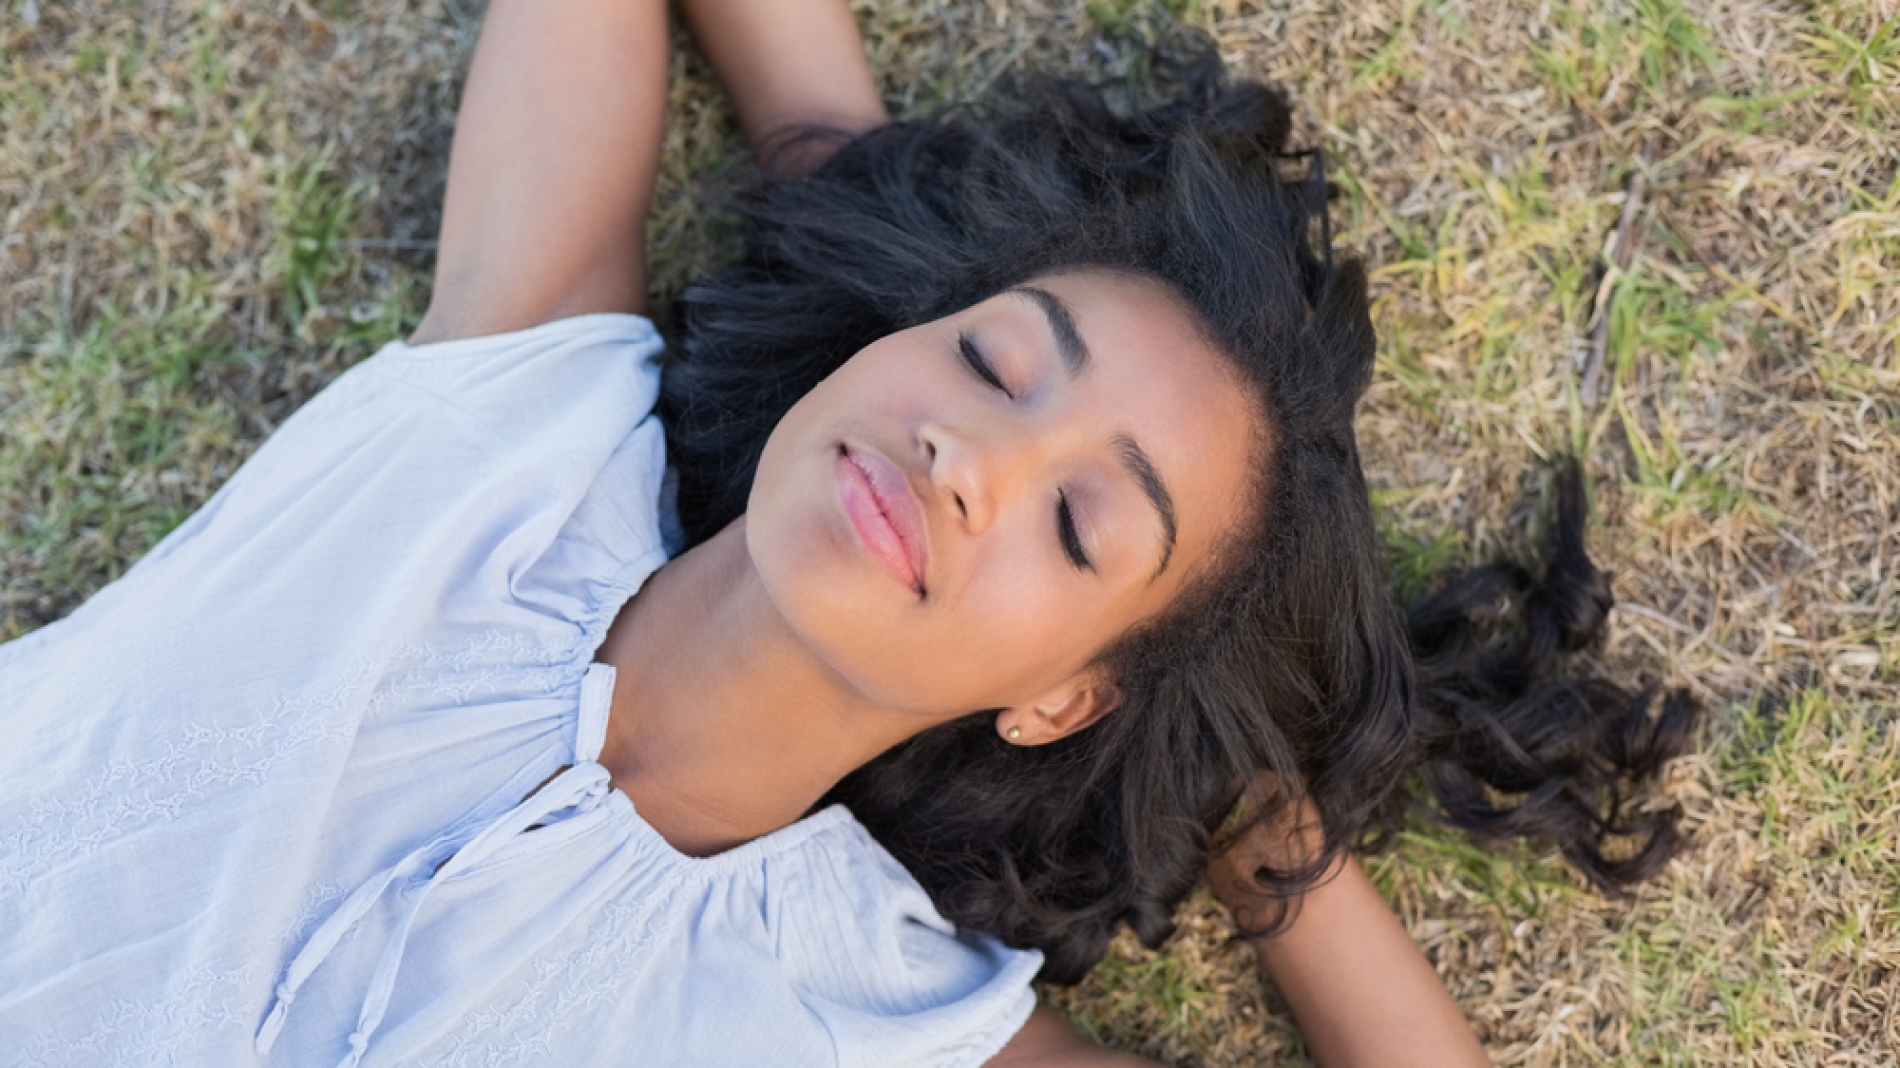 A young woman sleeping on the ground